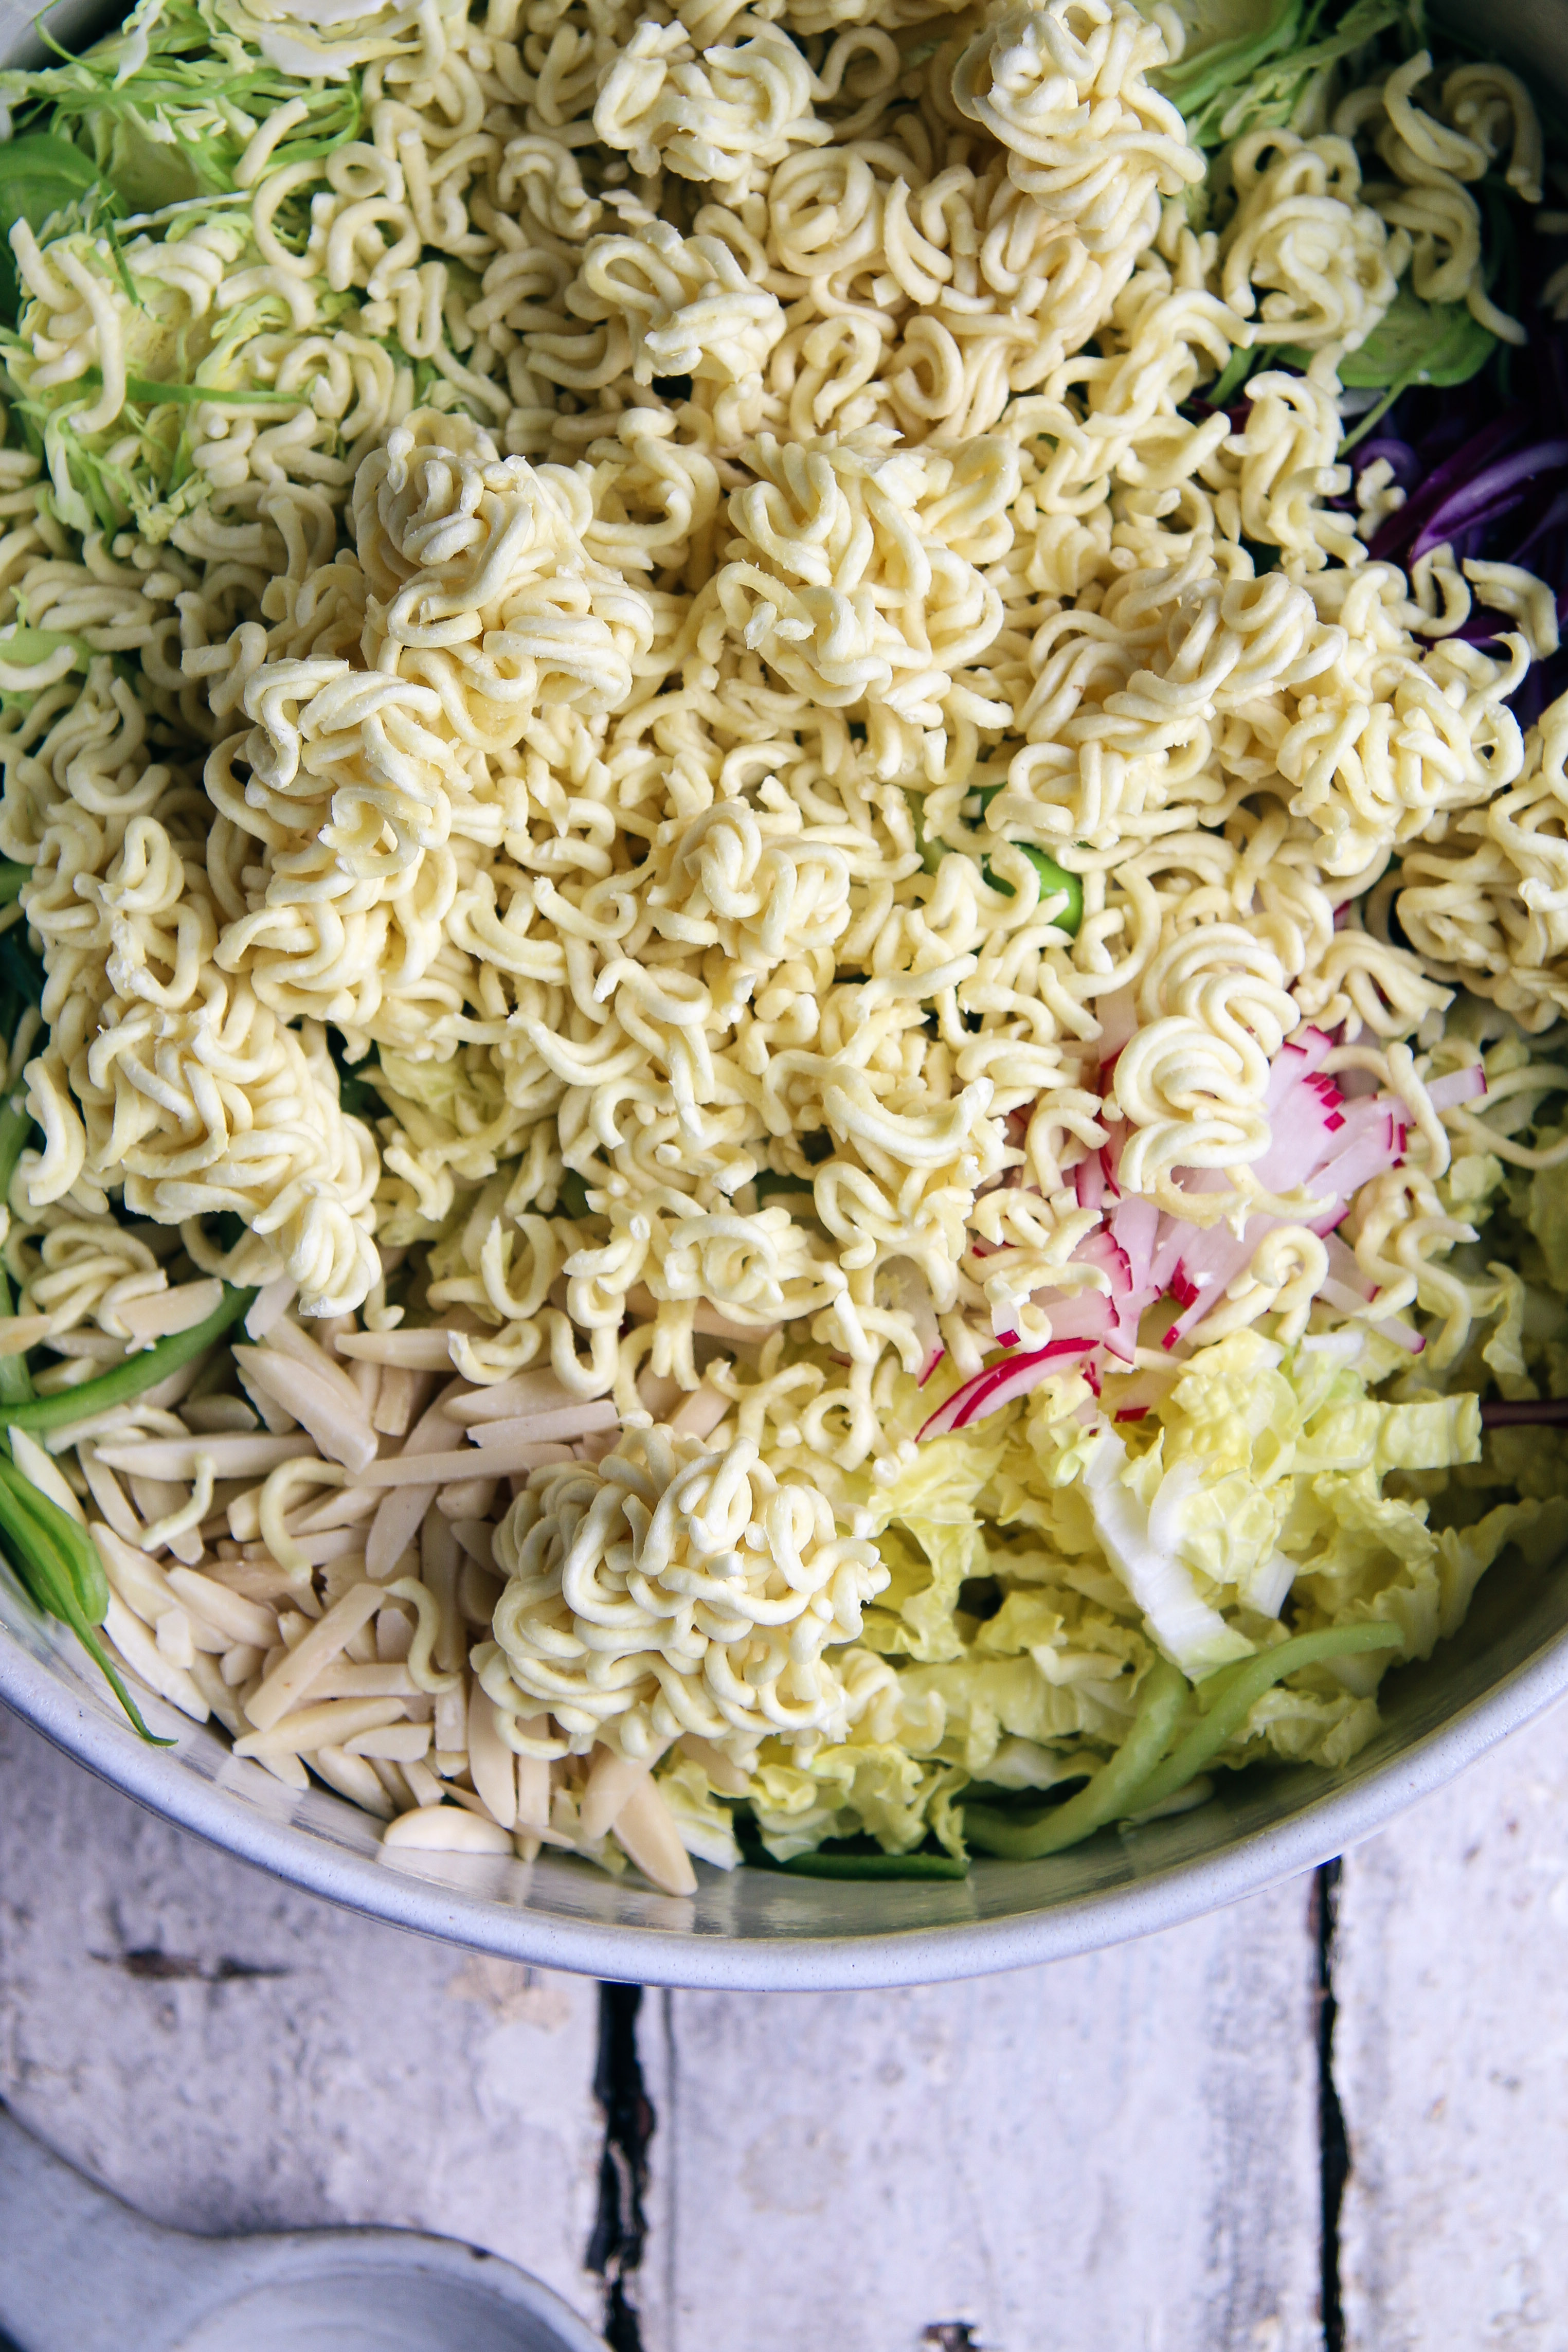 The Crunchiest Ramen Salad with tahini dressing and soft boiled egg | I Will Not Eat Oysters